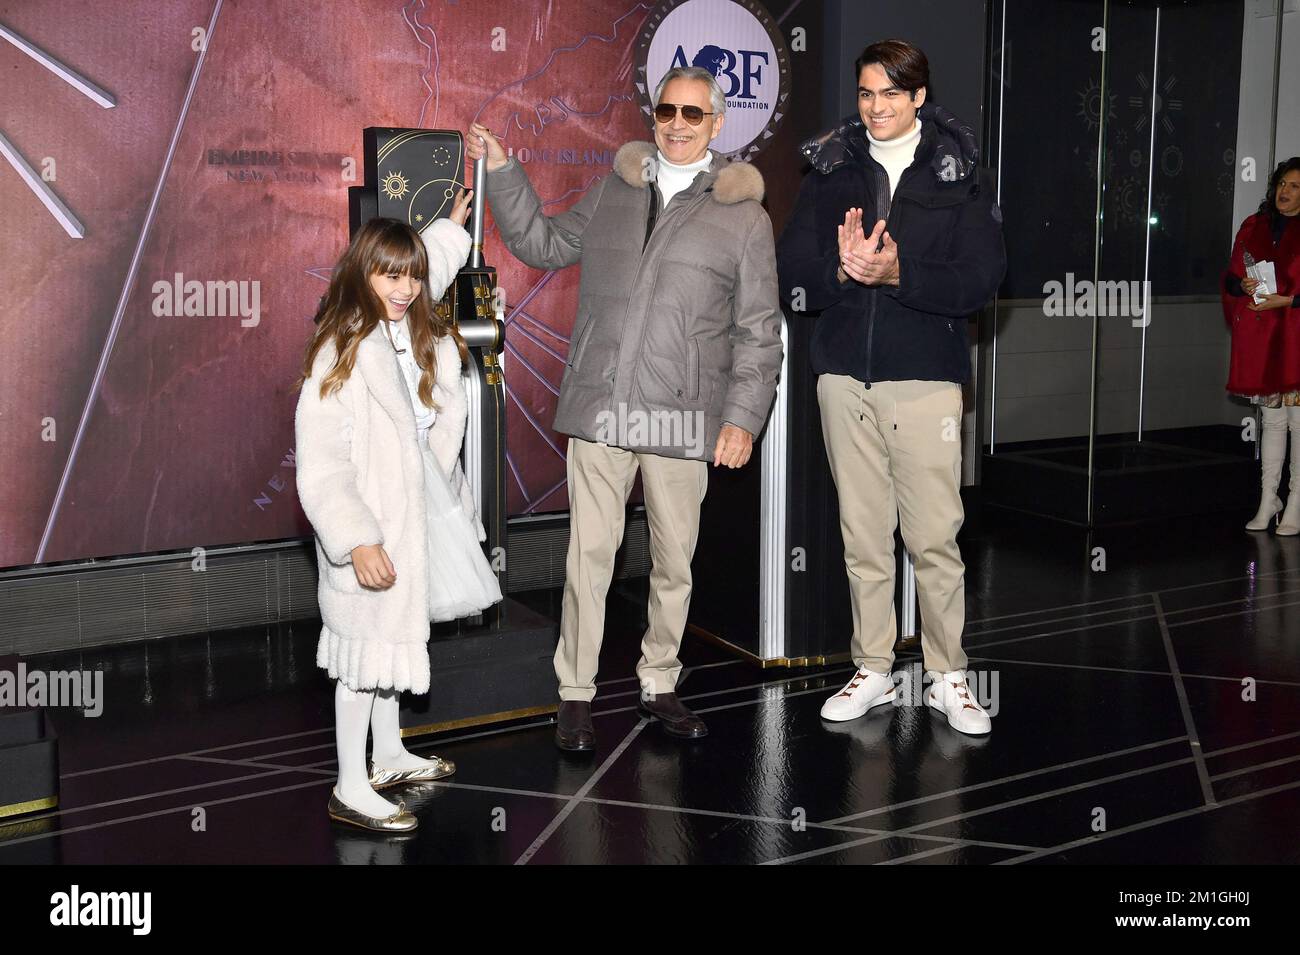 New York, USA. 12th Dec, 2022. Italian tenor Andrea Bocelli (c), and his children Matteo Bocelli (r) and Virginia Bocelli (l) participate in the ceremonial lighting of the Empire State Building in honor of the Andrea Bocelli Foundation's 'Voices of' charity, New York, NY, December 12, 2022. (Photo by Anthony Behar/Sipa USA) Credit: Sipa USA/Alamy Live News Stock Photo